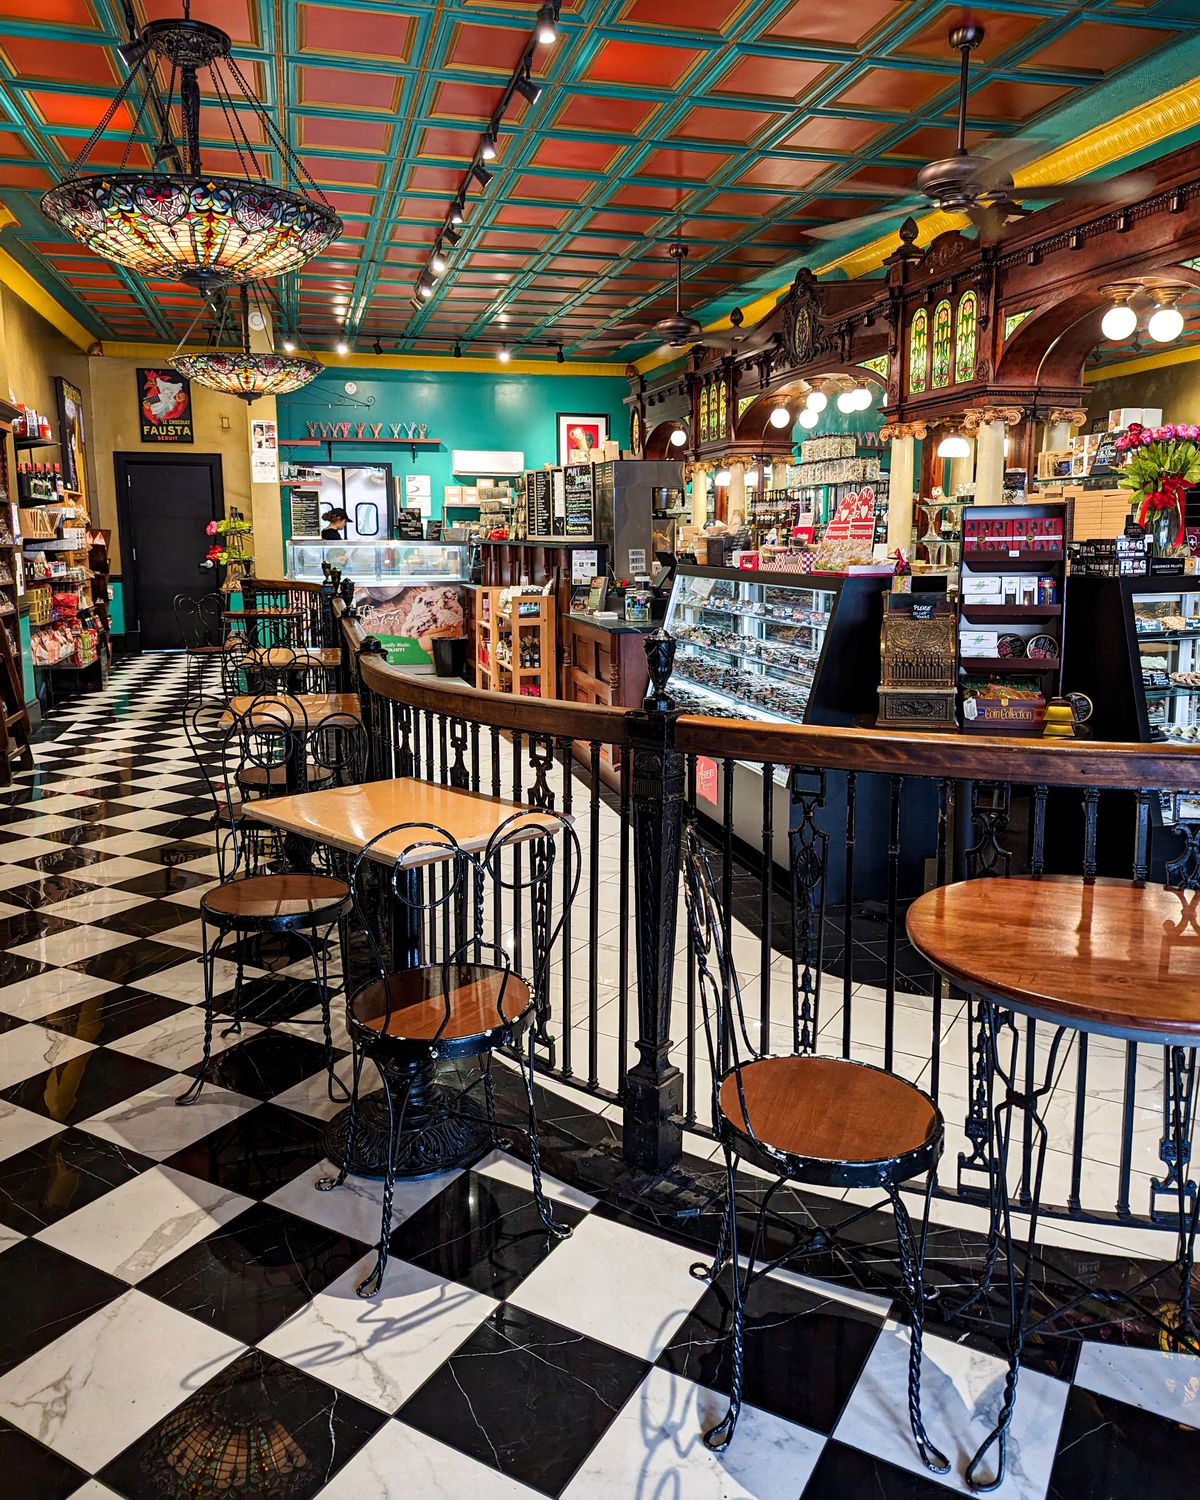 The image shows an interior view of a charming vintage-style café. The café features a beautifully intricate ceiling with a colorful, geometric pattern, and two elegant stained-glass chandeliers hanging from above. The floor is a classic black and white checkered design. The seating area includes black wrought iron chairs and small wooden tables, adding to the old-fashioned aesthetic. The counter area displays a variety of sweets, pastries, and other treats, with antique wooden cabinets and stained-glass panels enhancing the nostalgic atmosphere. A touch of modernity is seen with the presence of various products and menus behind the counter.